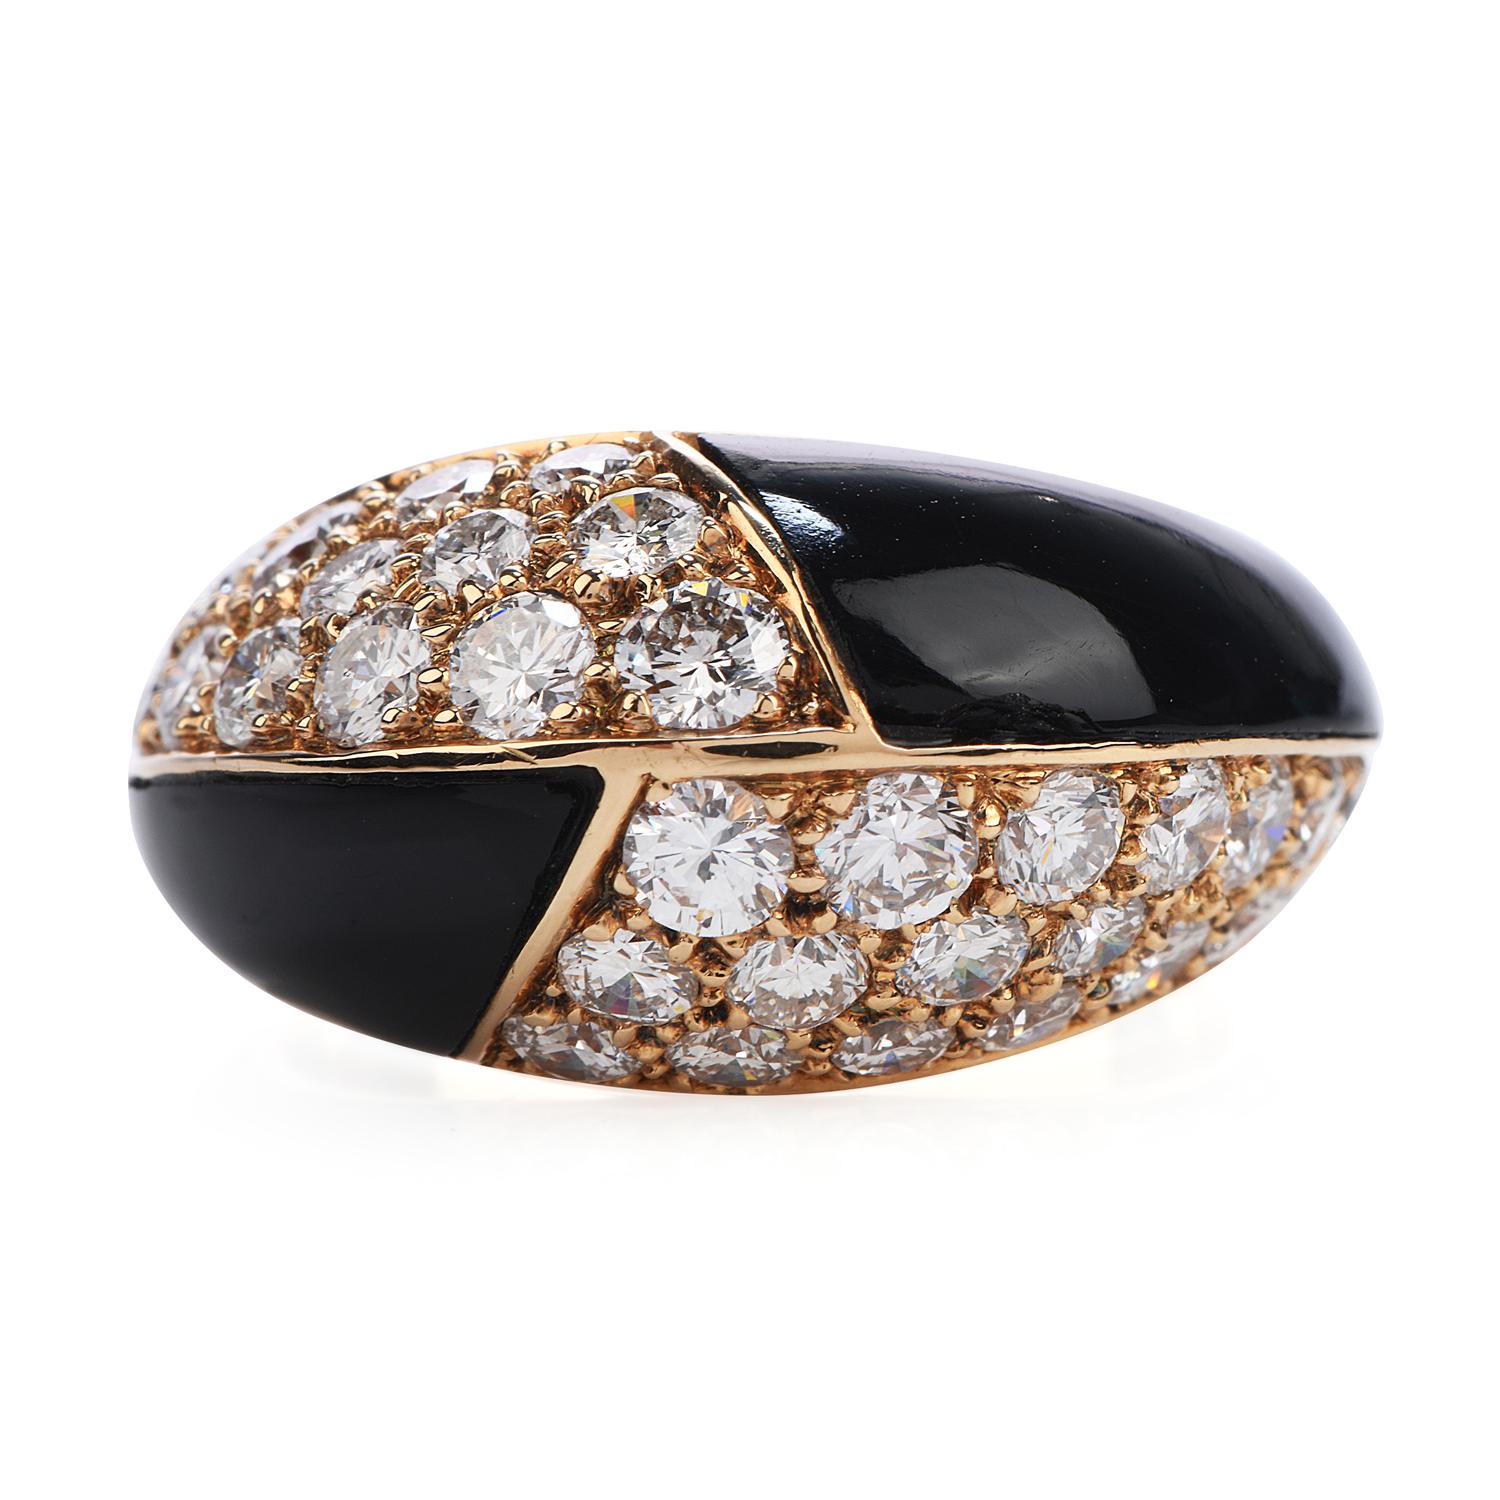 This stunning Mauboussin French ring was inspired in a double motif and created in 18K white gold.

Adorning the top are carved black onyx and 36 natural diamond weighing approx. 2.90 carats .

Hallmarked, Purity marked and Numbered.

Ring Size: 5.5